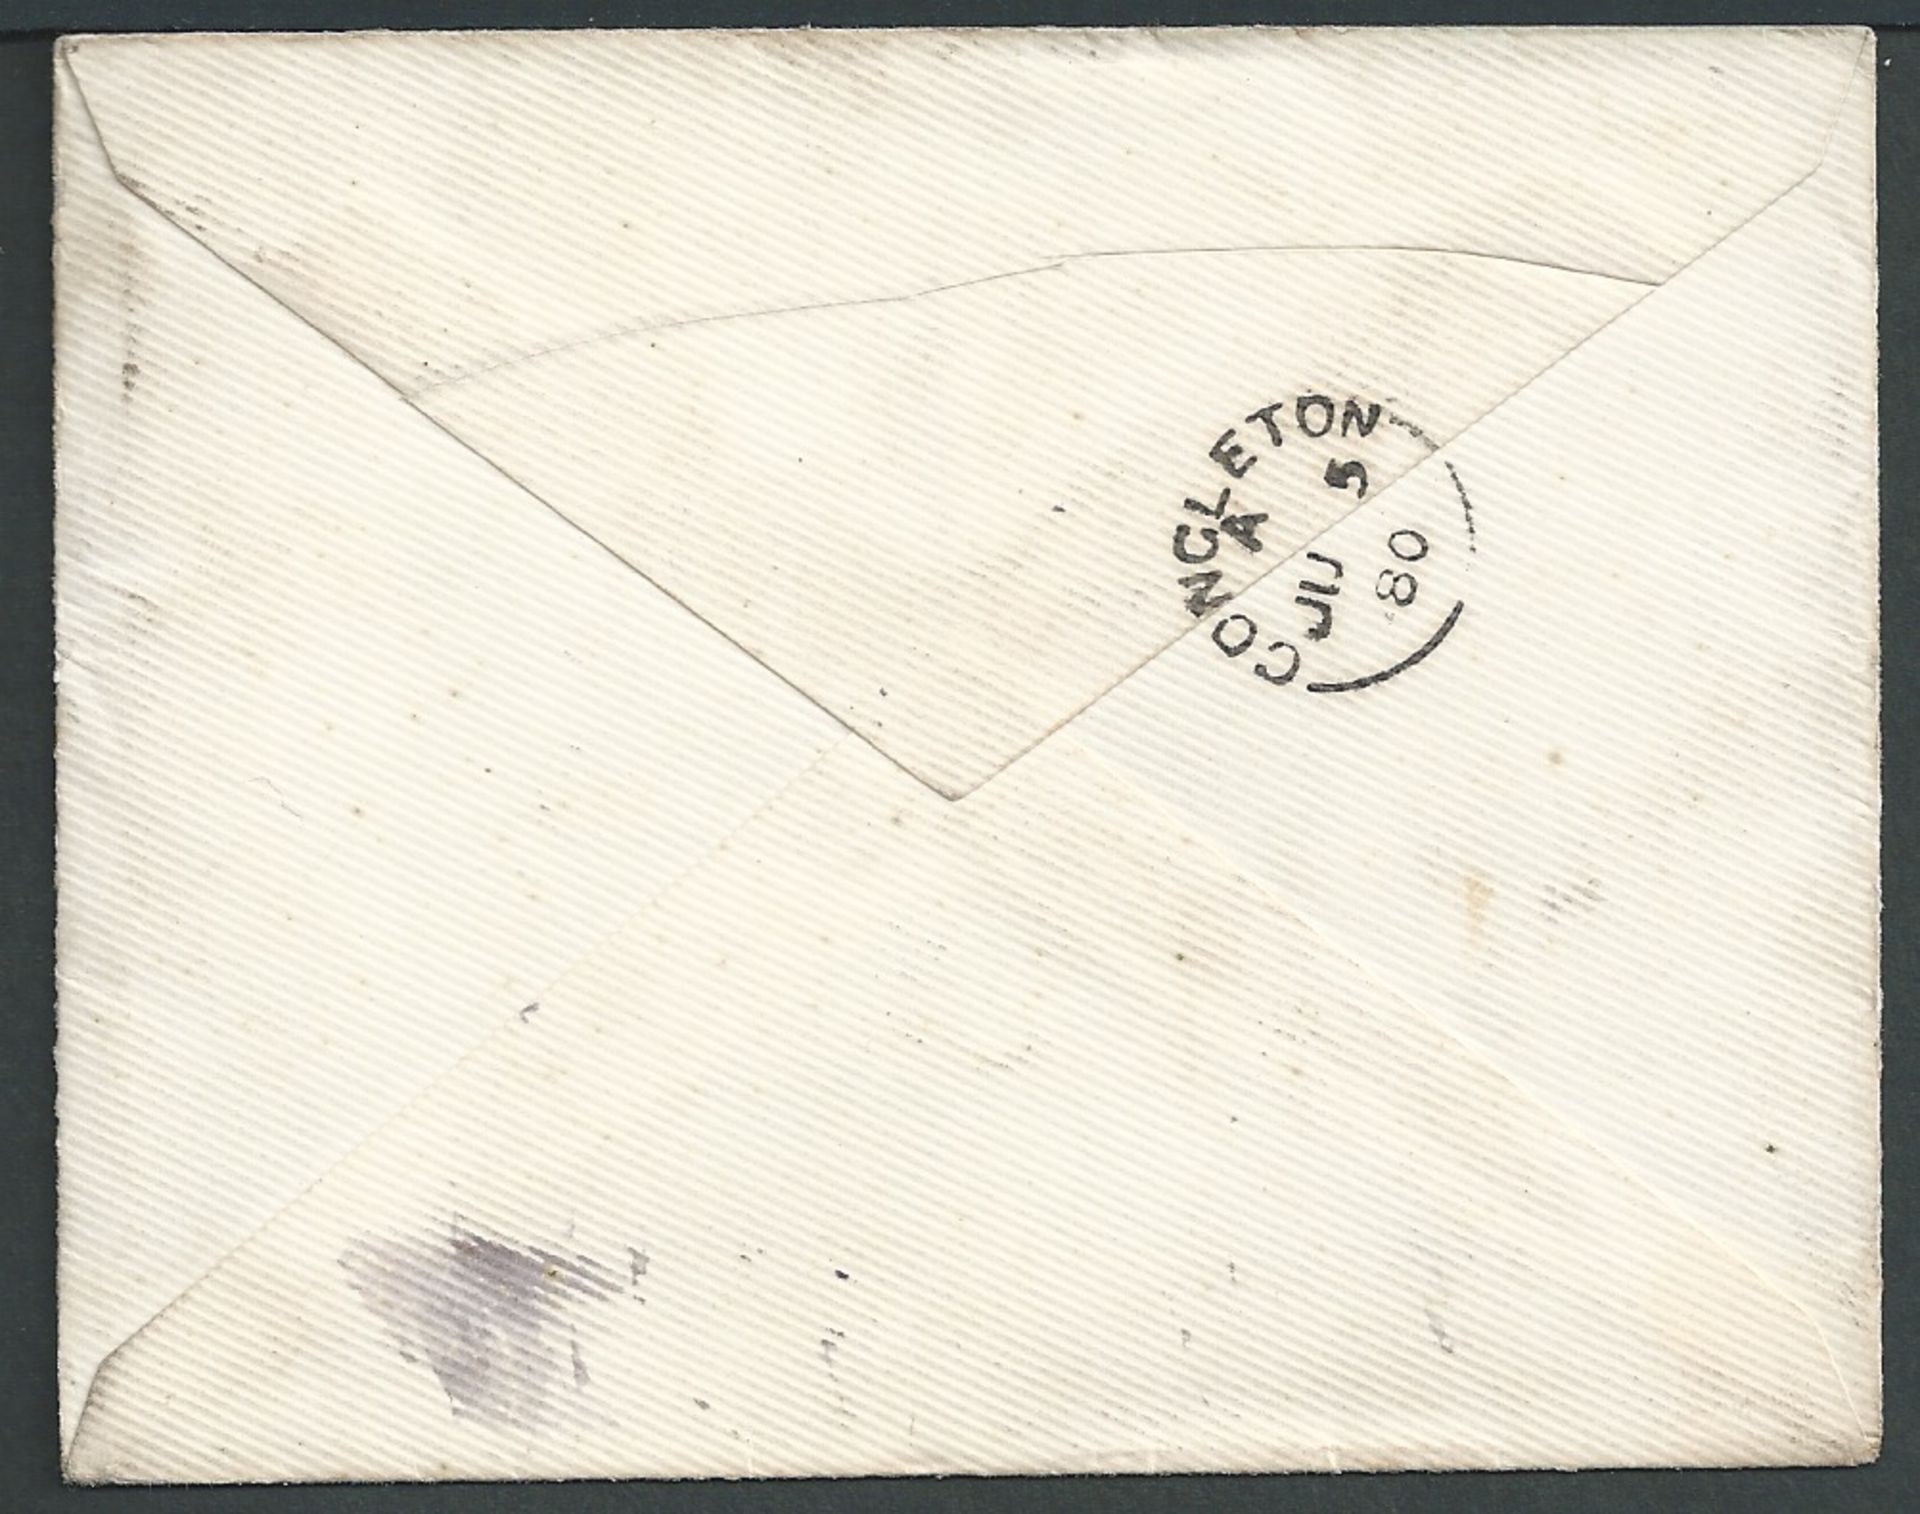 Cape of Good Hope / GB - Postage Dues 1880 Cover from Cape Town to England - Image 2 of 2